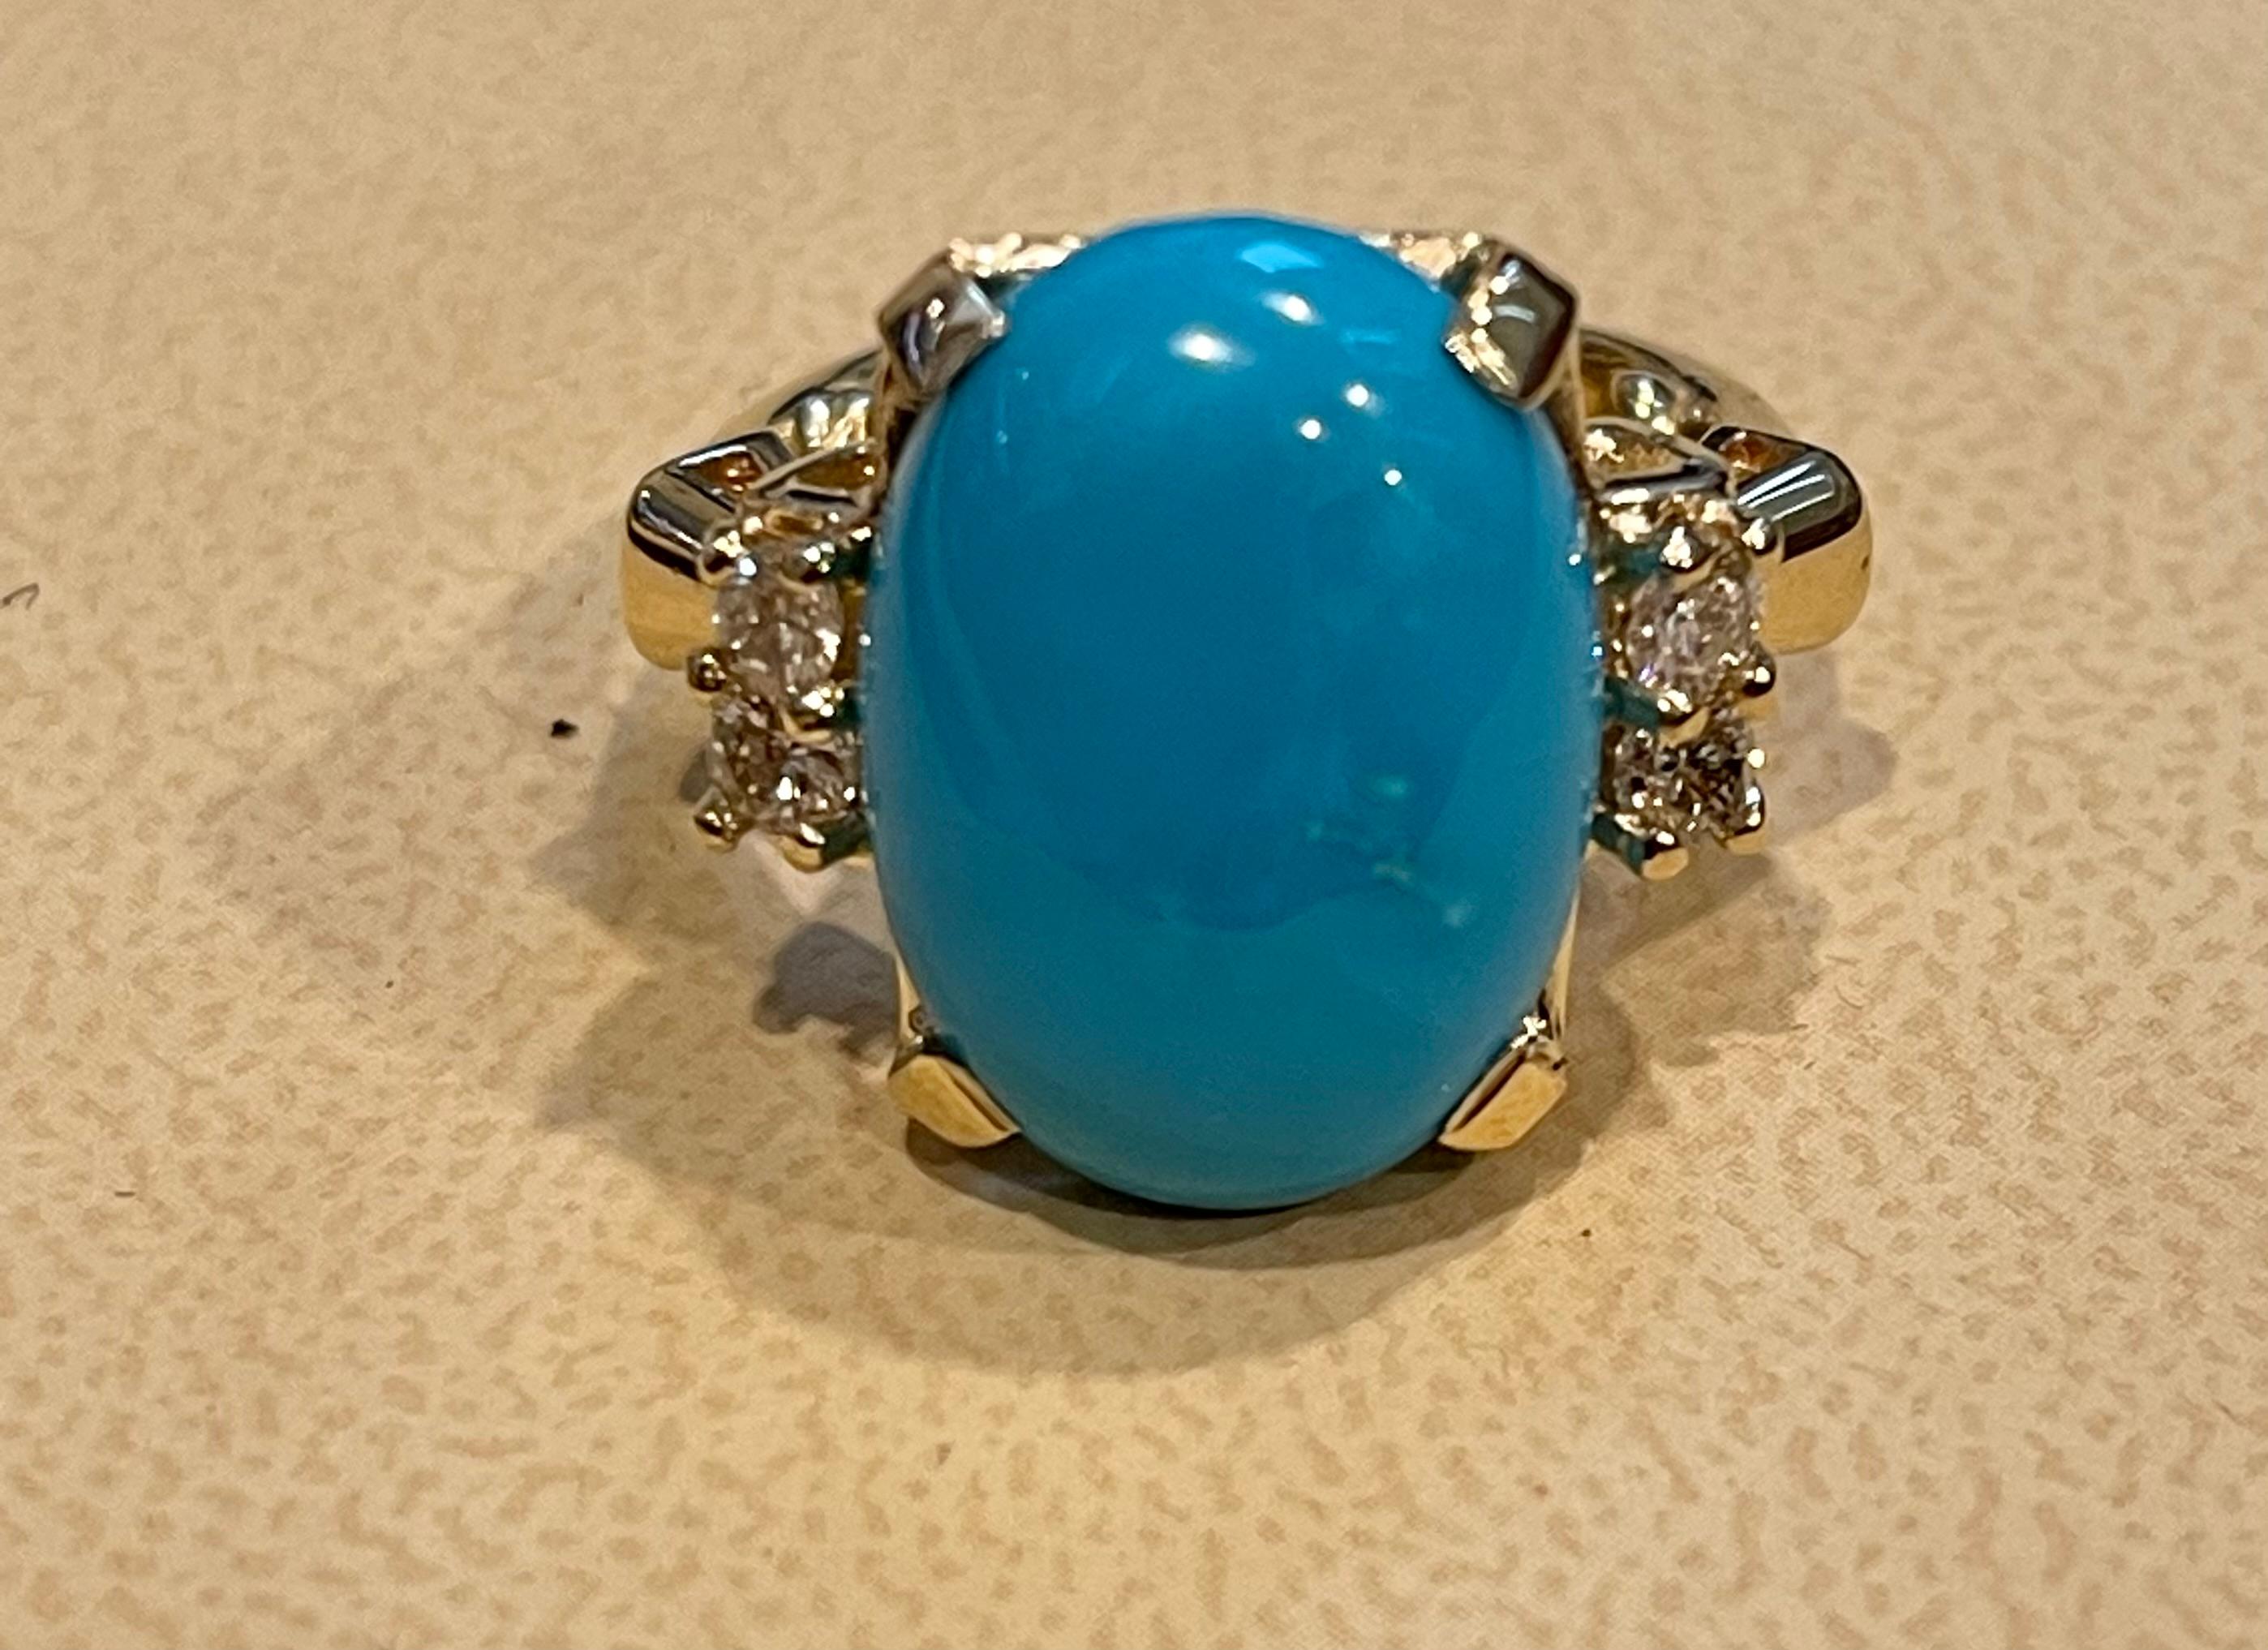 
Vintage Natural Oval Sleeping Beauty Turquoise Ring With Diamonds, 14 Karat Yellow Gold
Approximately 10 Ct of Sleeping Beauty  Turquoise  and  .25 Ct of Diamonds
two diamonds on each side of center stone
14 karat gold 6.8  Grams 
 Diamonds: